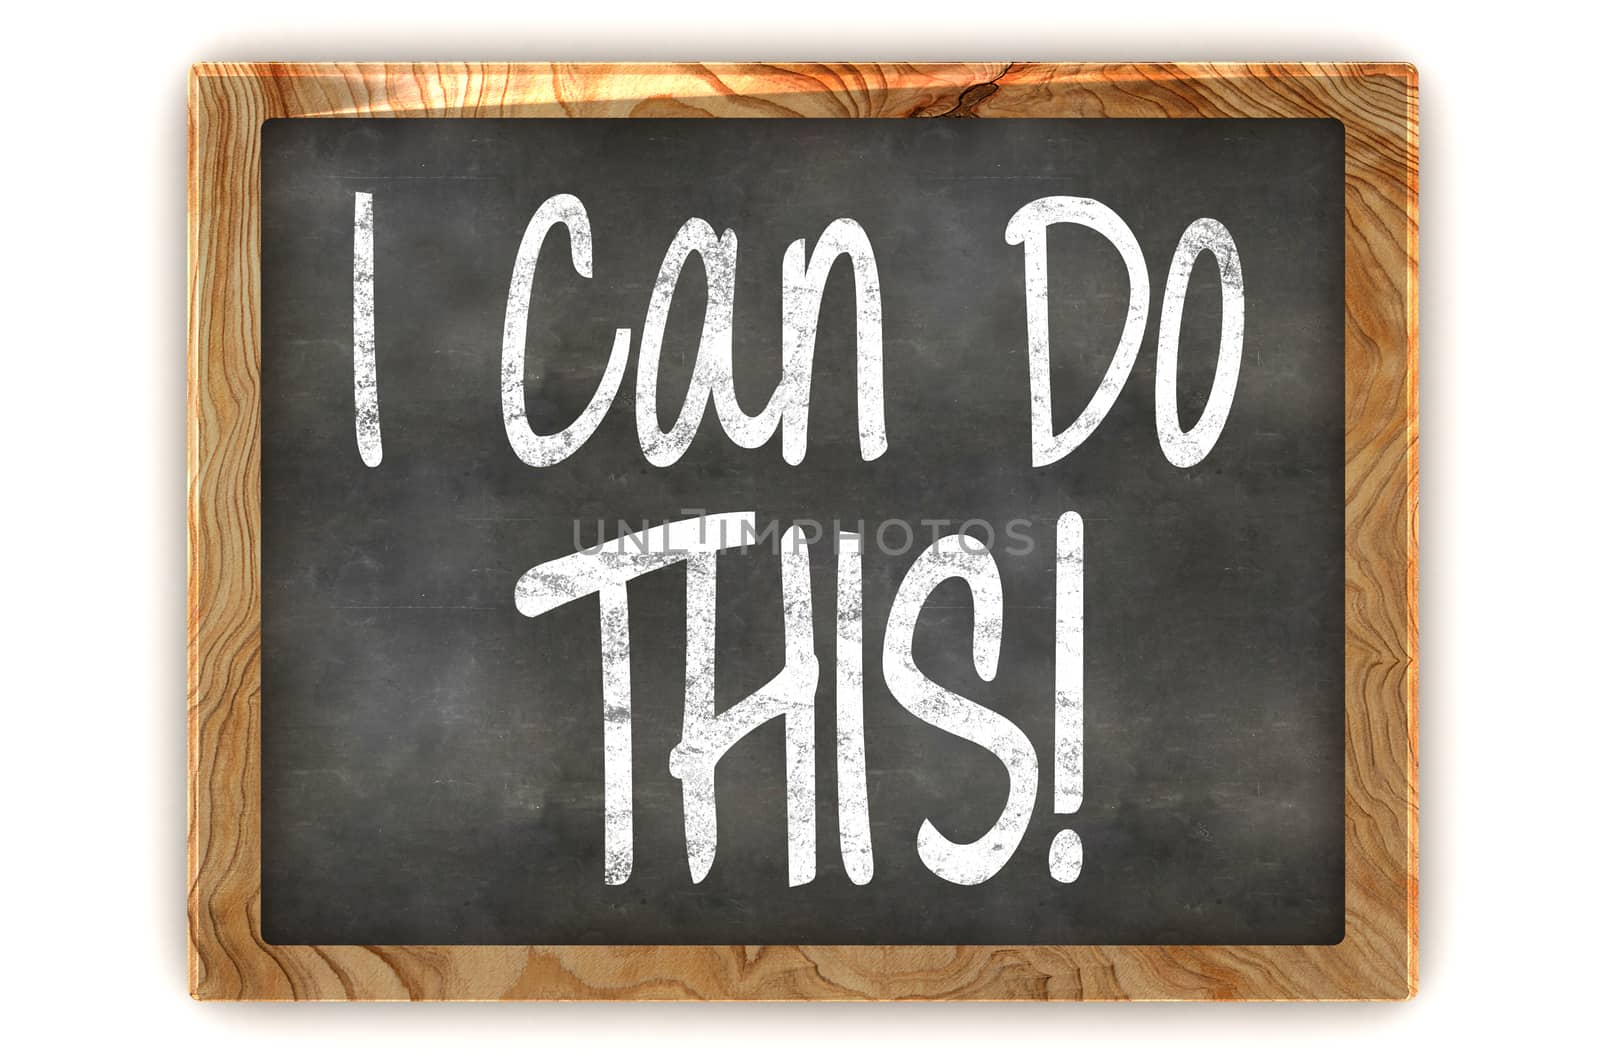 A Colourful 3d Rendered Blackboard showing the Inspirational Message "I Can Do This!"